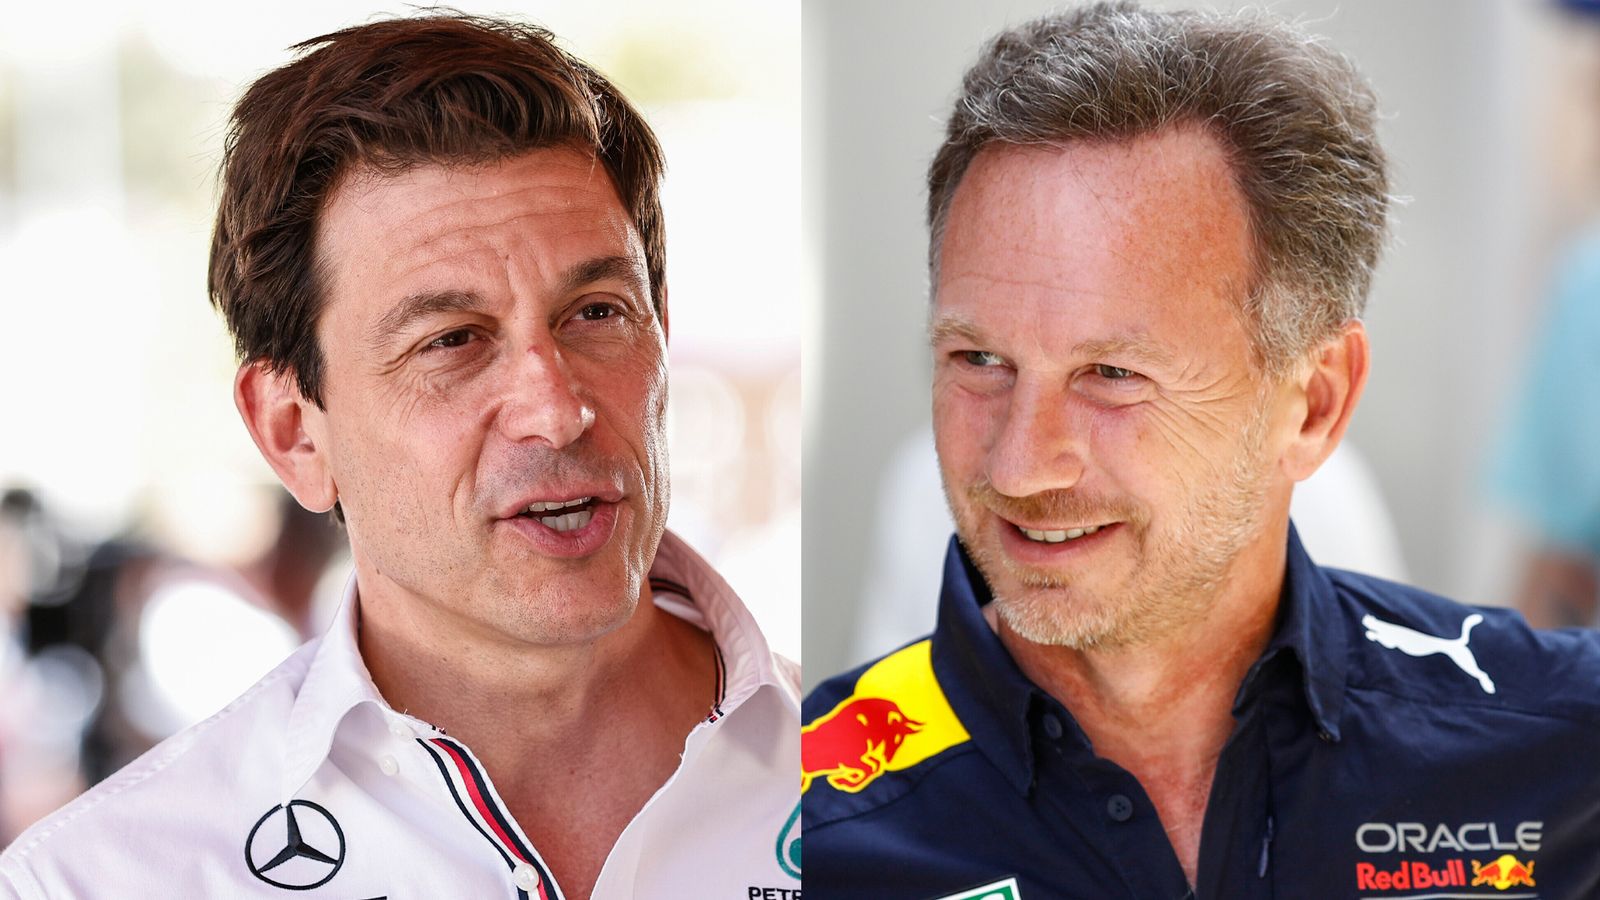 Mercedes boss Toto Wolff slams ‘pitiful’ F1 rivals over porpoising row, Christian Horner hits back with ‘theatre’ jibe